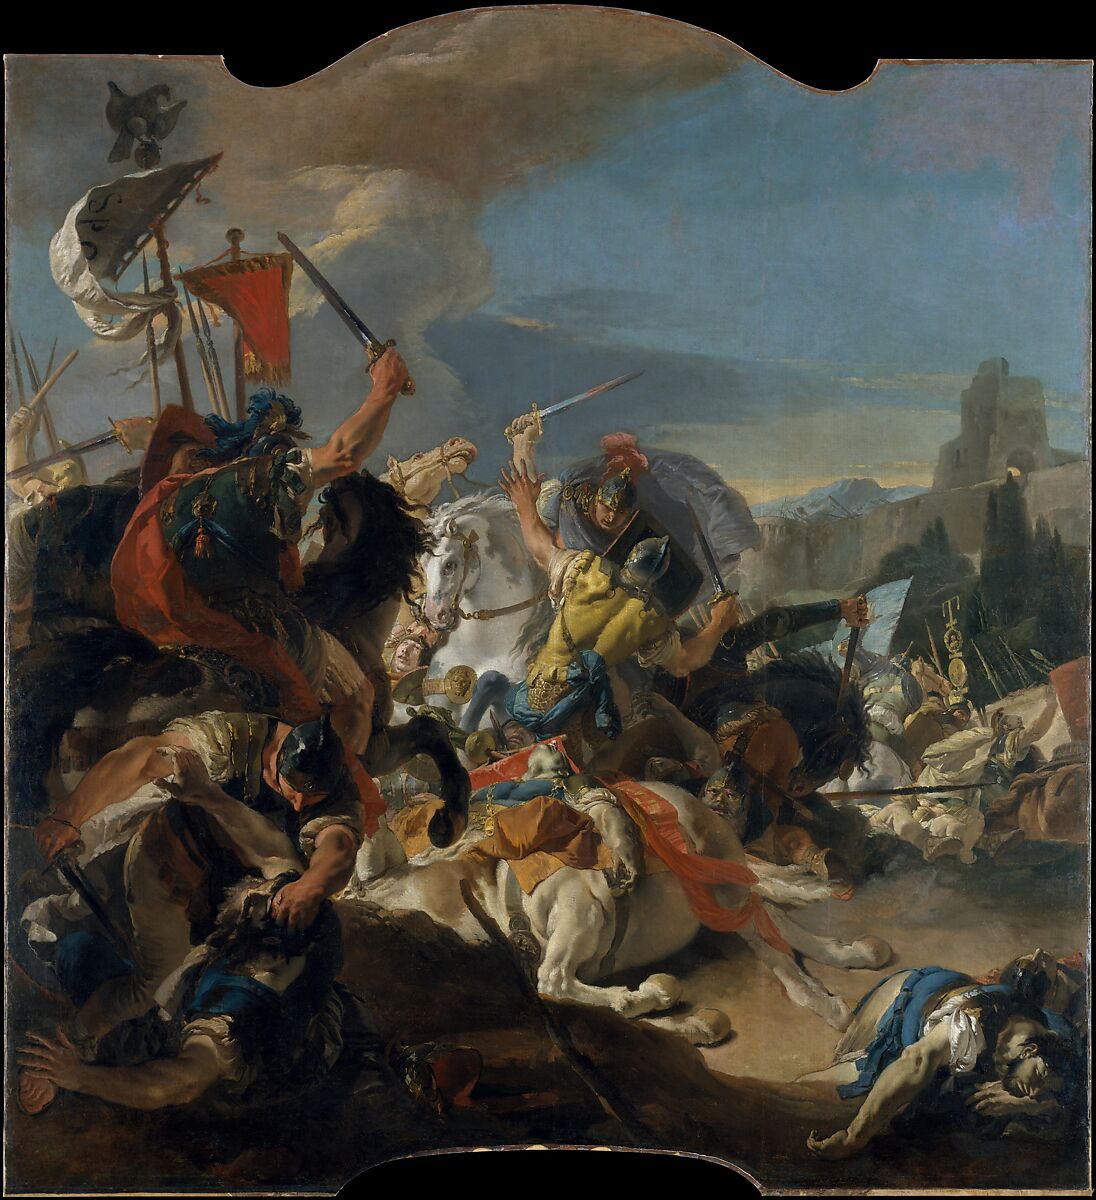 +Italian+painter+Giovanni+Battista+Tiepolo%E2%80%99s+The+Battle+of+Vercellae+depicts+the+violent+rage+that+fuels+conflict+and+its+consequences%2C+death+and+destruction.+%28Image+Credit%3A+Giovanni+Battista+Tiepolo%2C+Public+domain%2C+via+Wikimedia+Commons%29%0A